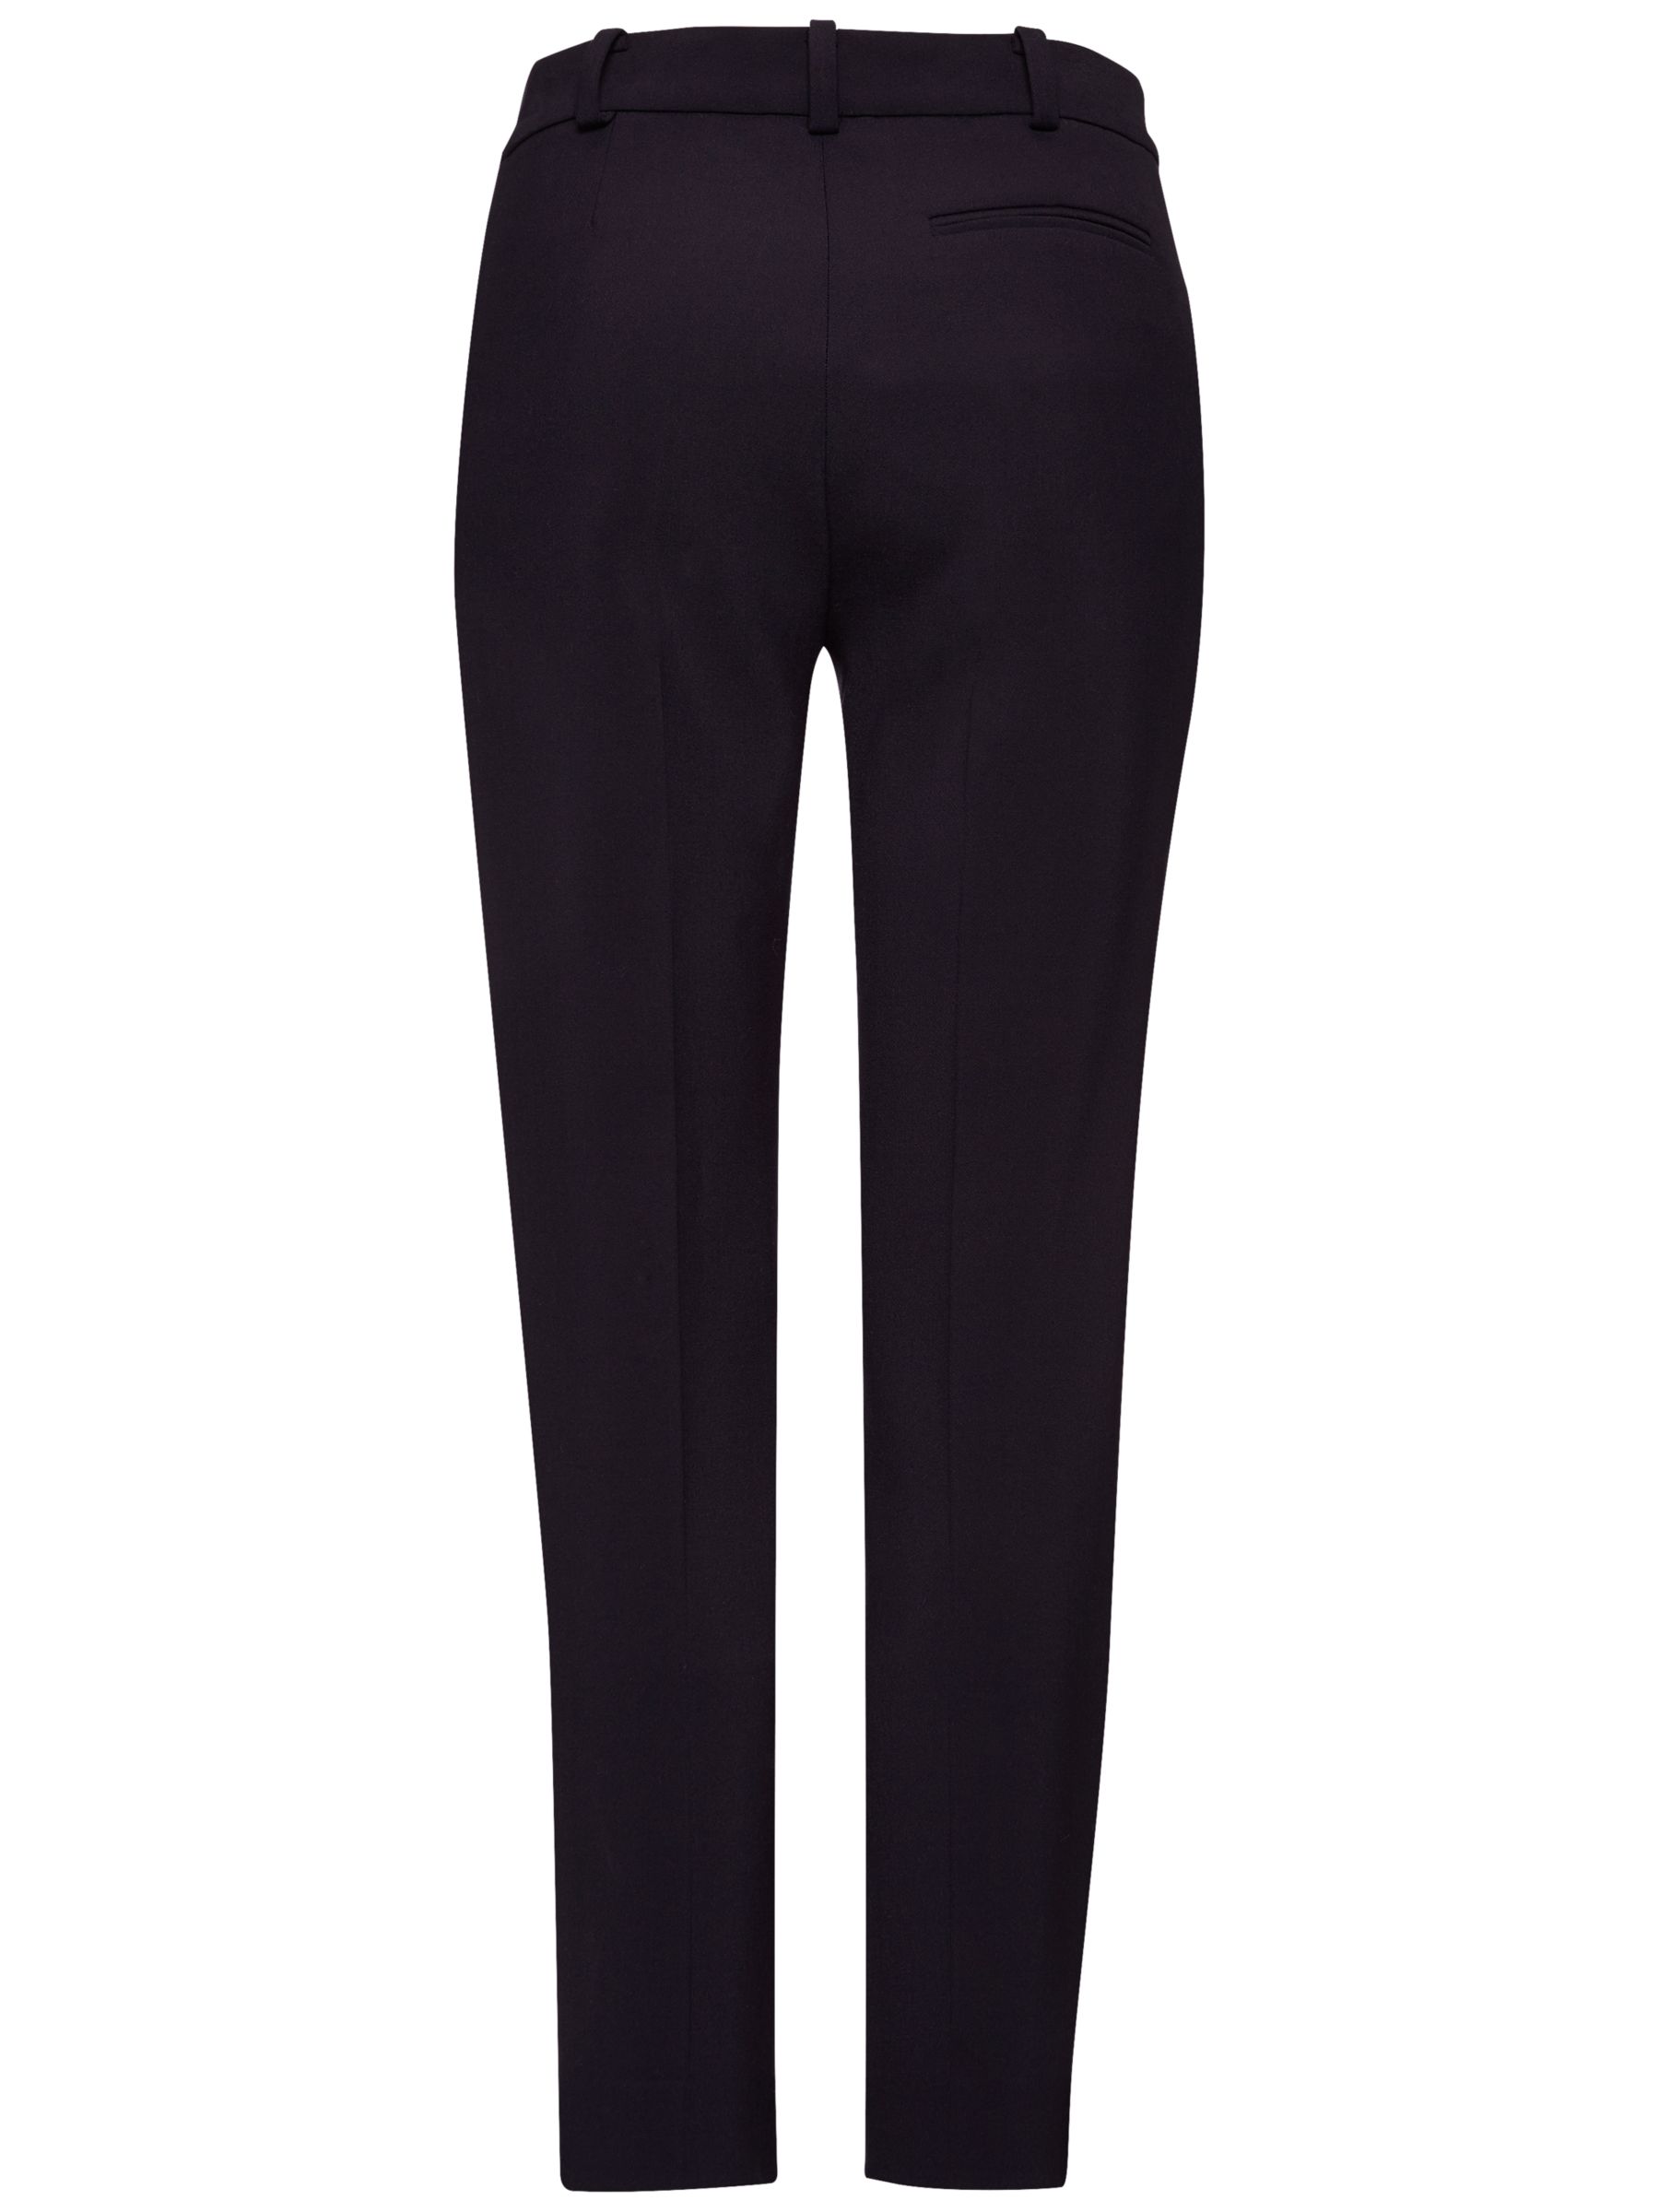 Buy Jaeger Stretch 7/8ths Trousers | John Lewis